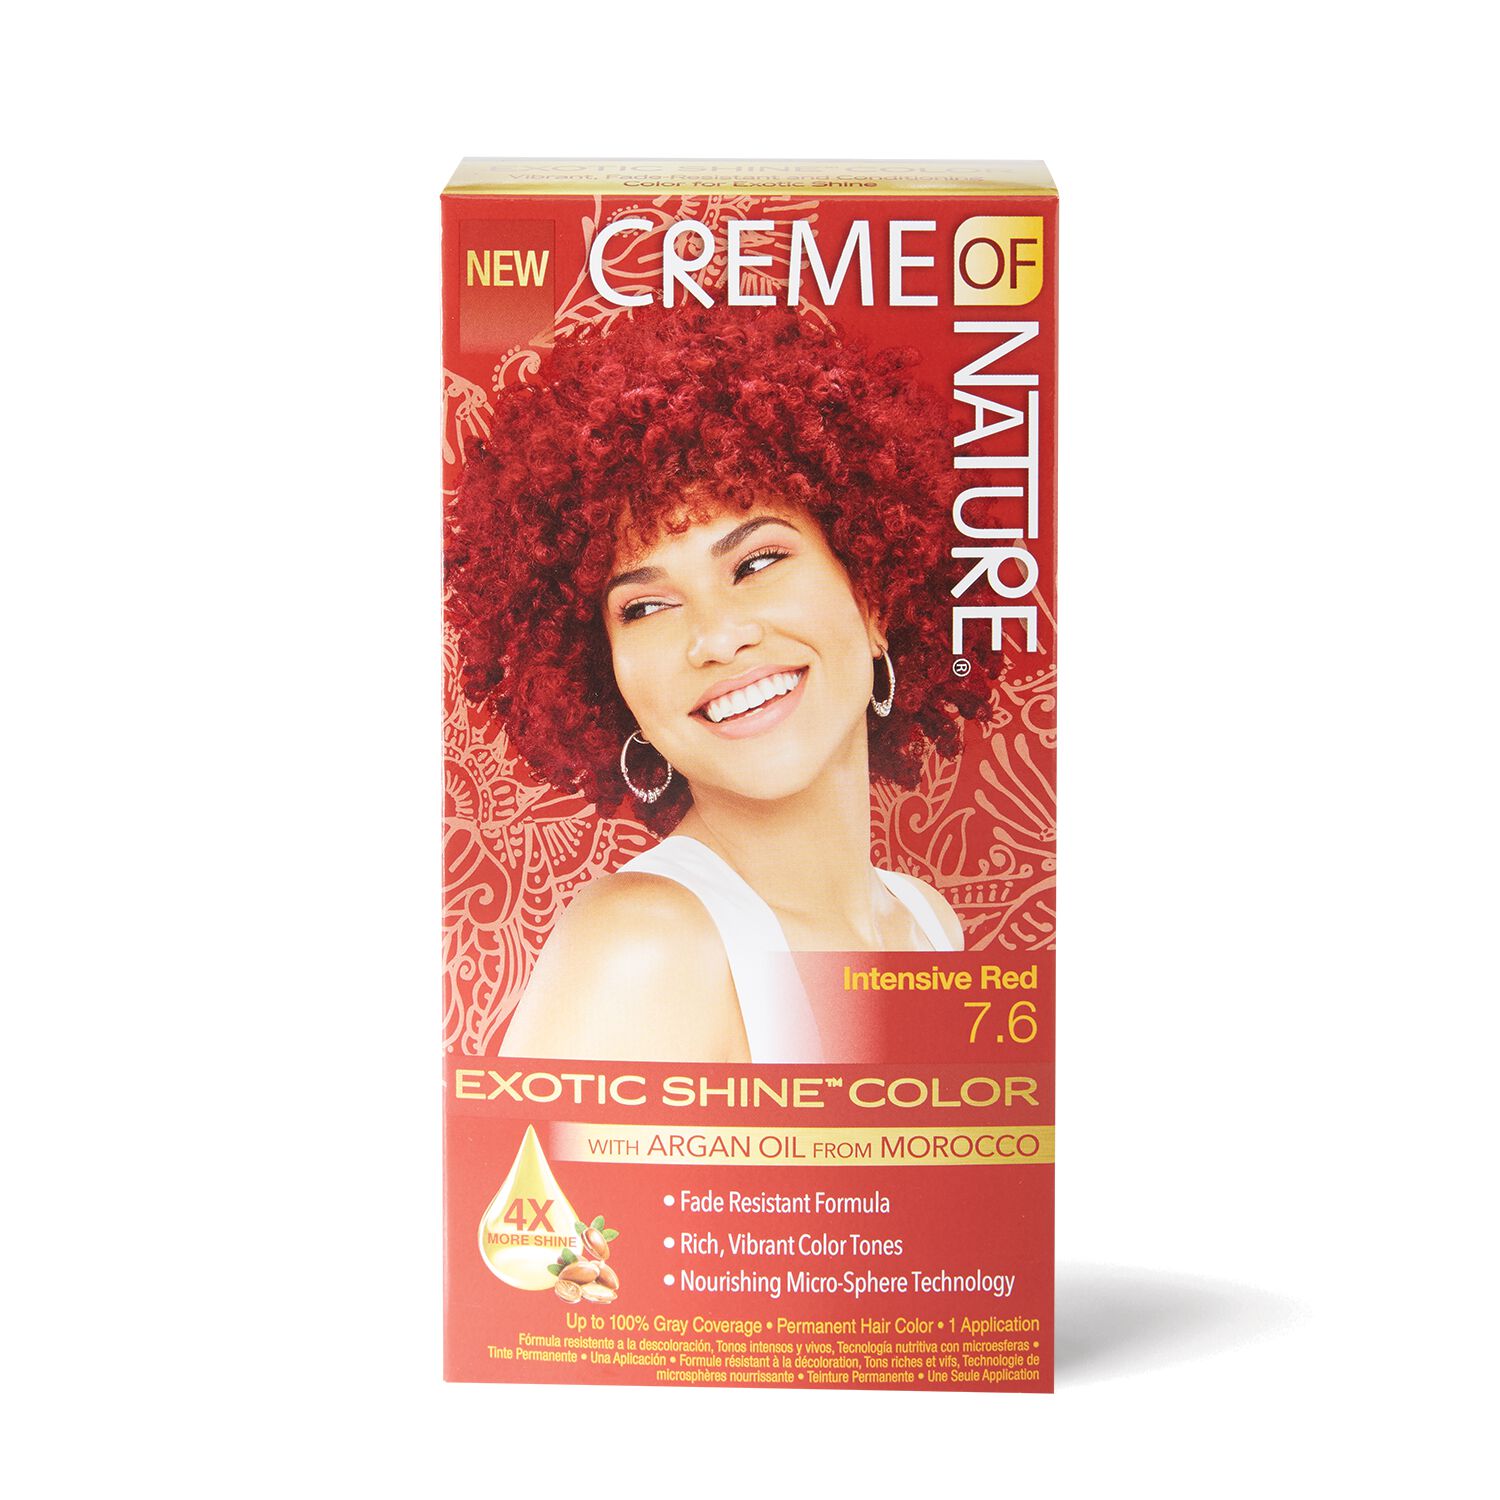 Exotic Shine Intensive Red Permanent Hair Color by Creme of Nature ...